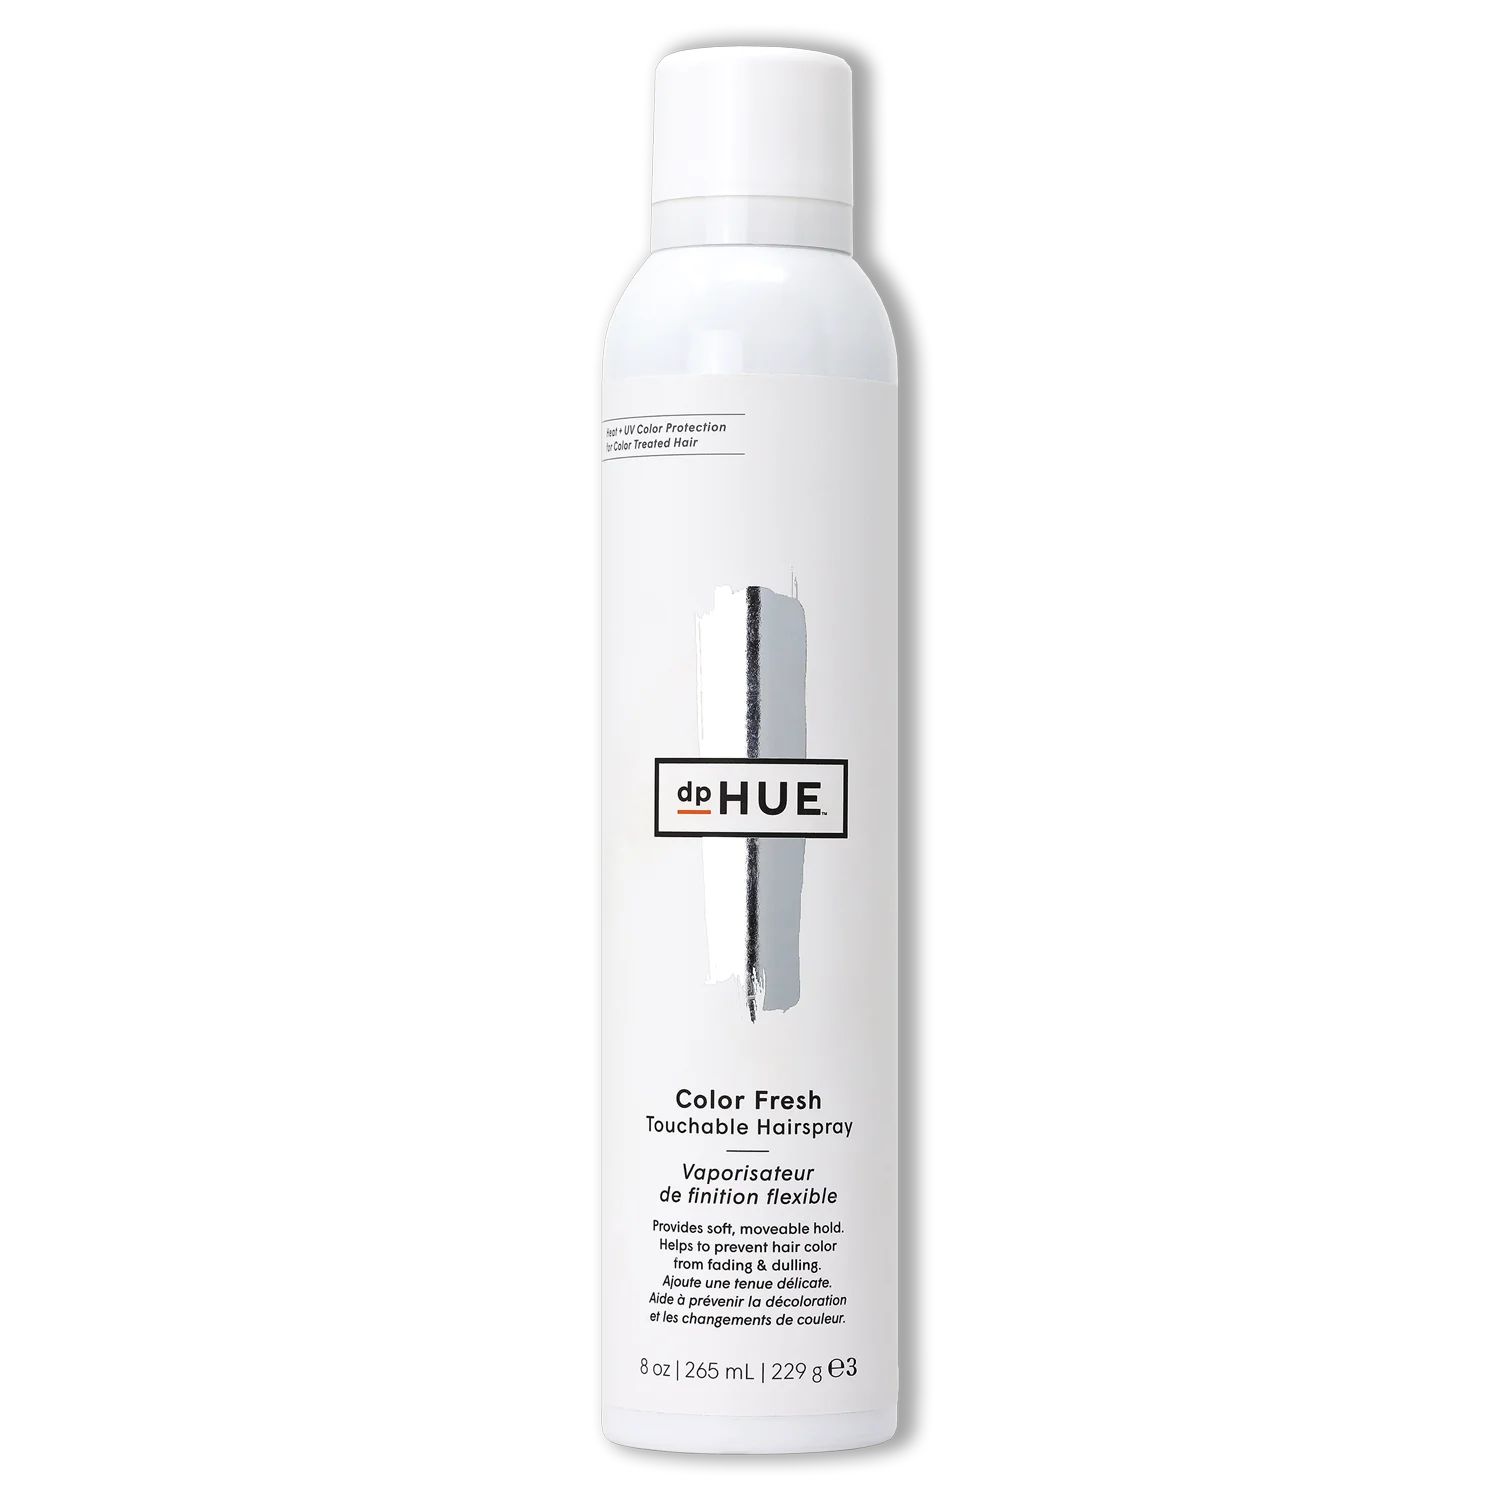 Color Fresh Touchable Hairspray | dpHUE